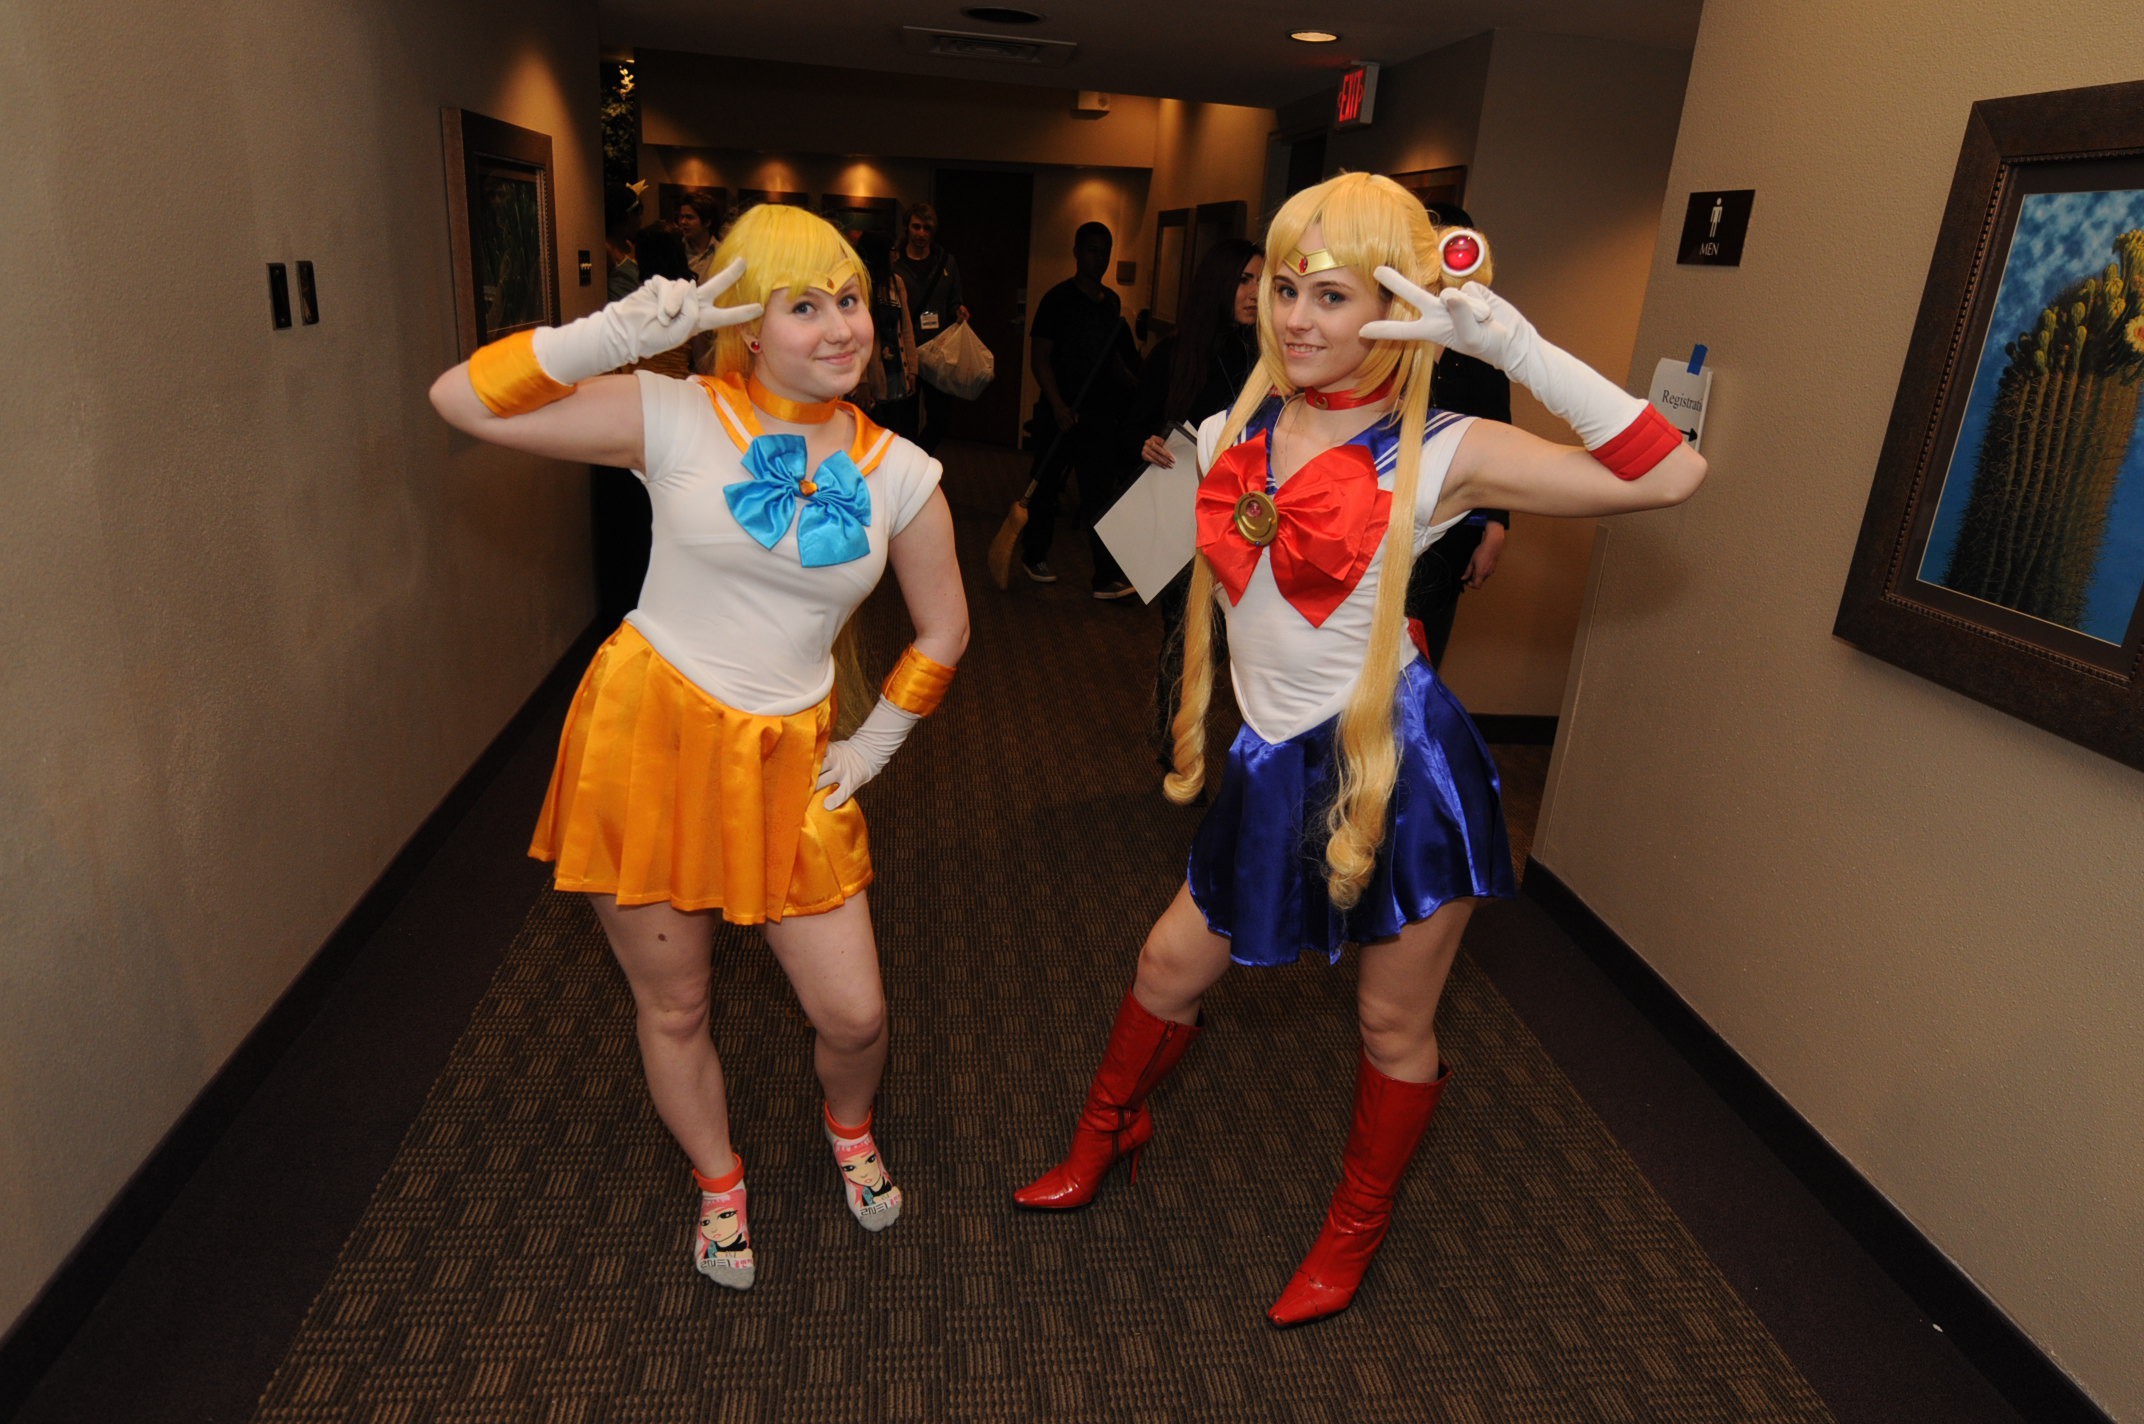 Saboten Con 2019 in downtown Phoenix allows anime lovers to cosplay